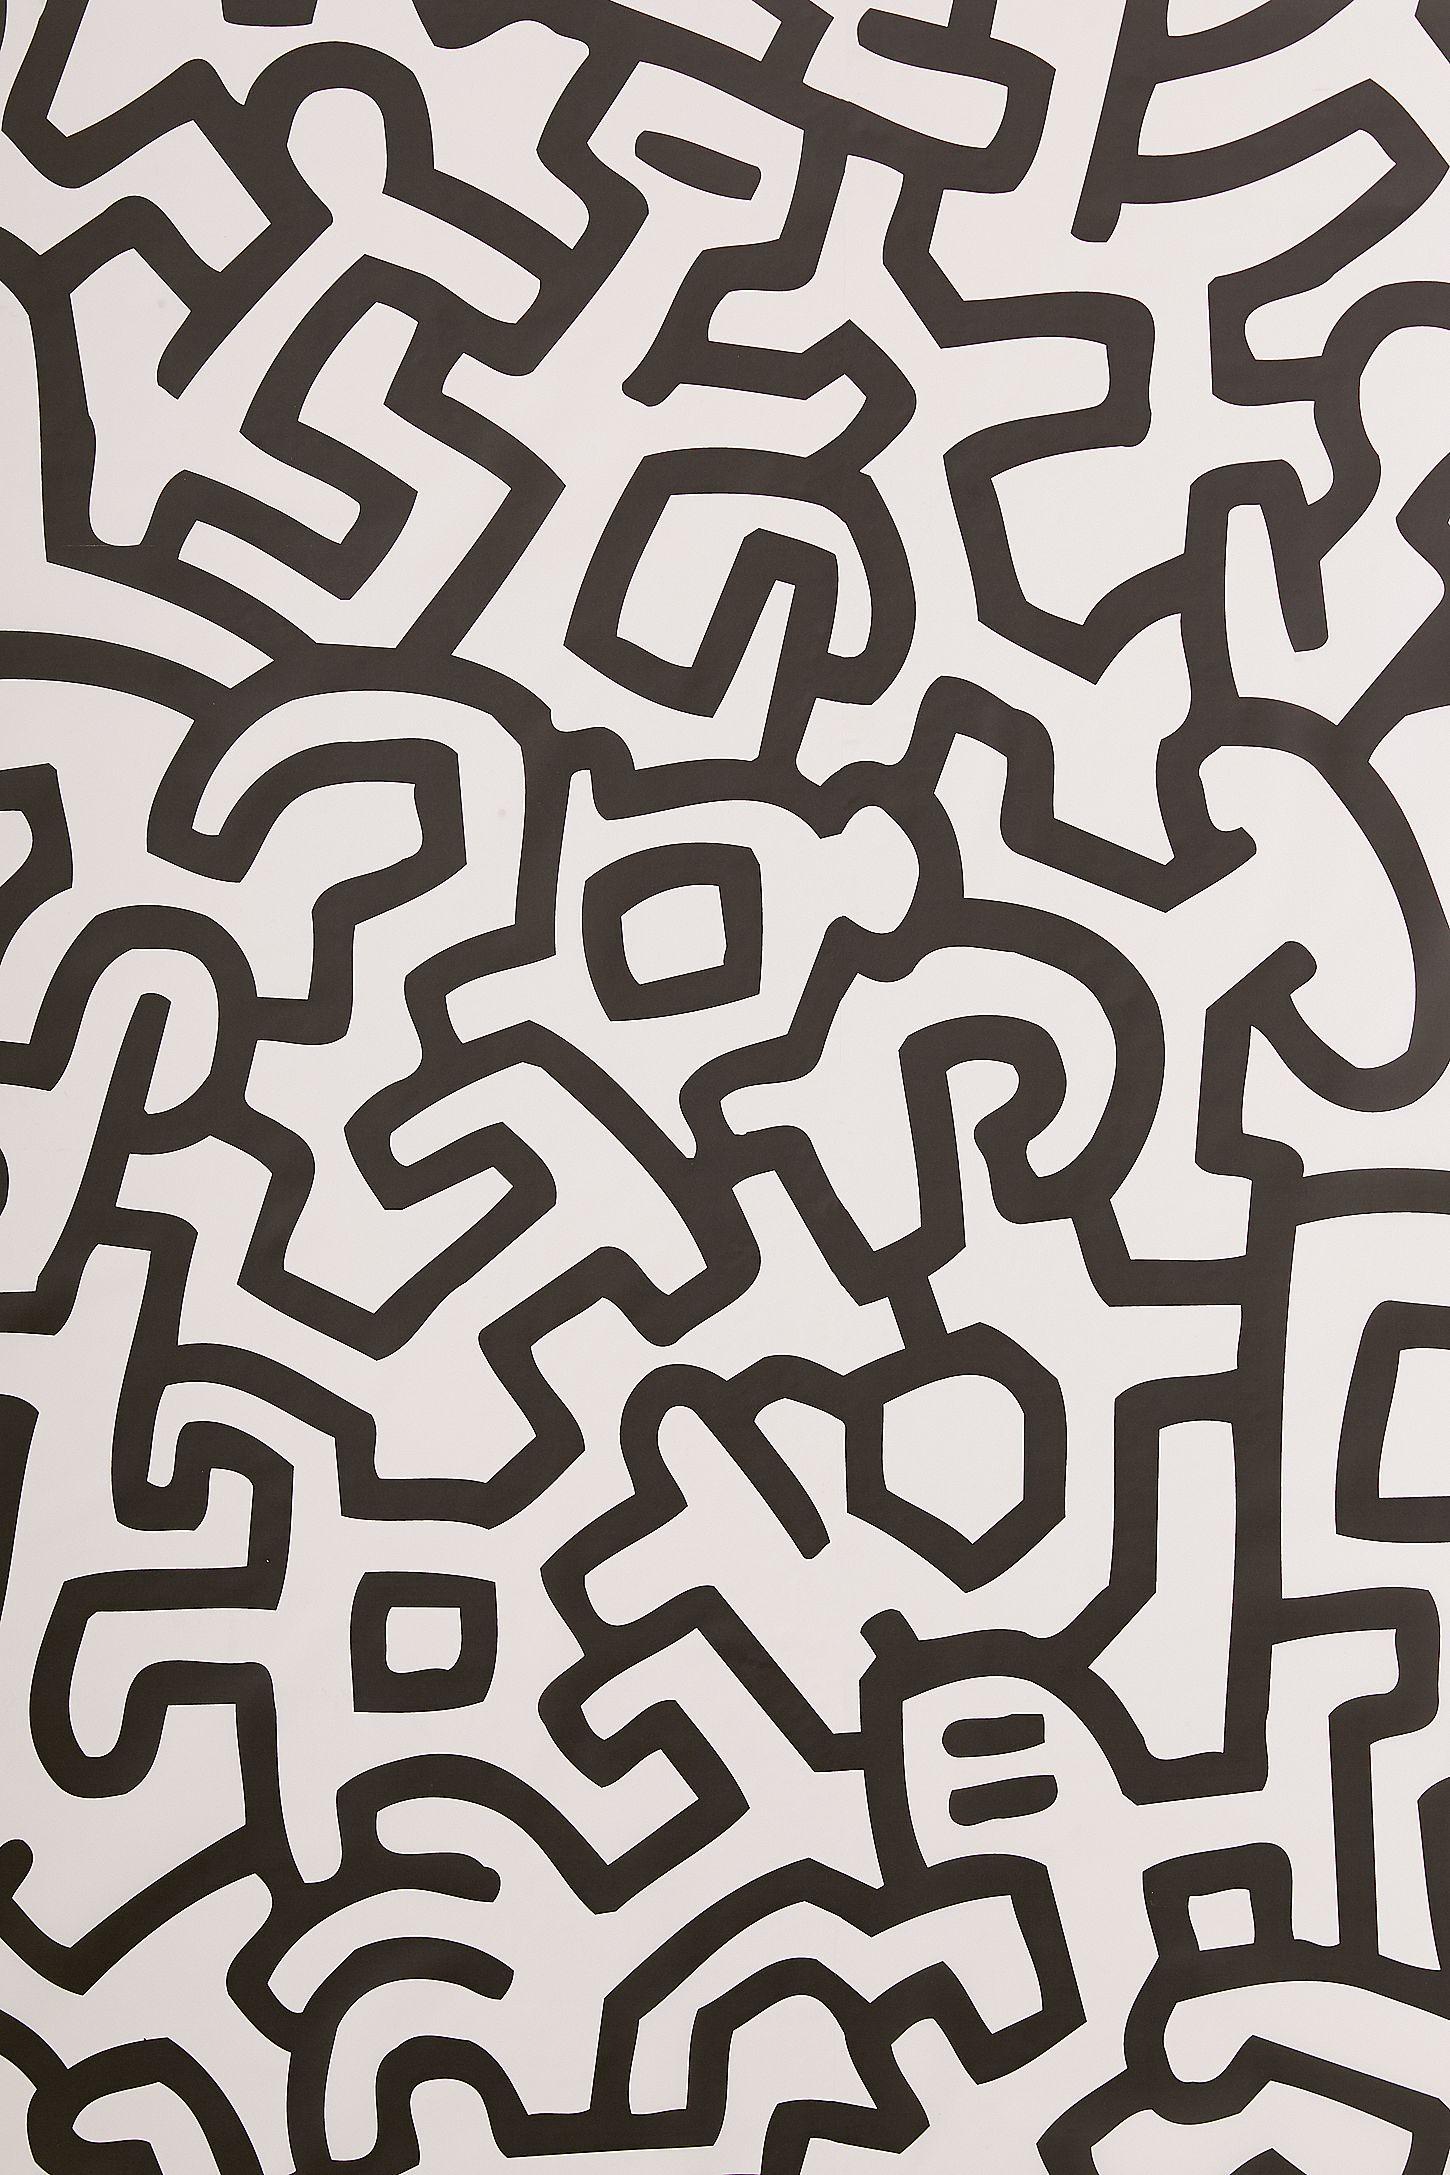 Keith Haring Removable Wallpaper Tile. Keith haring